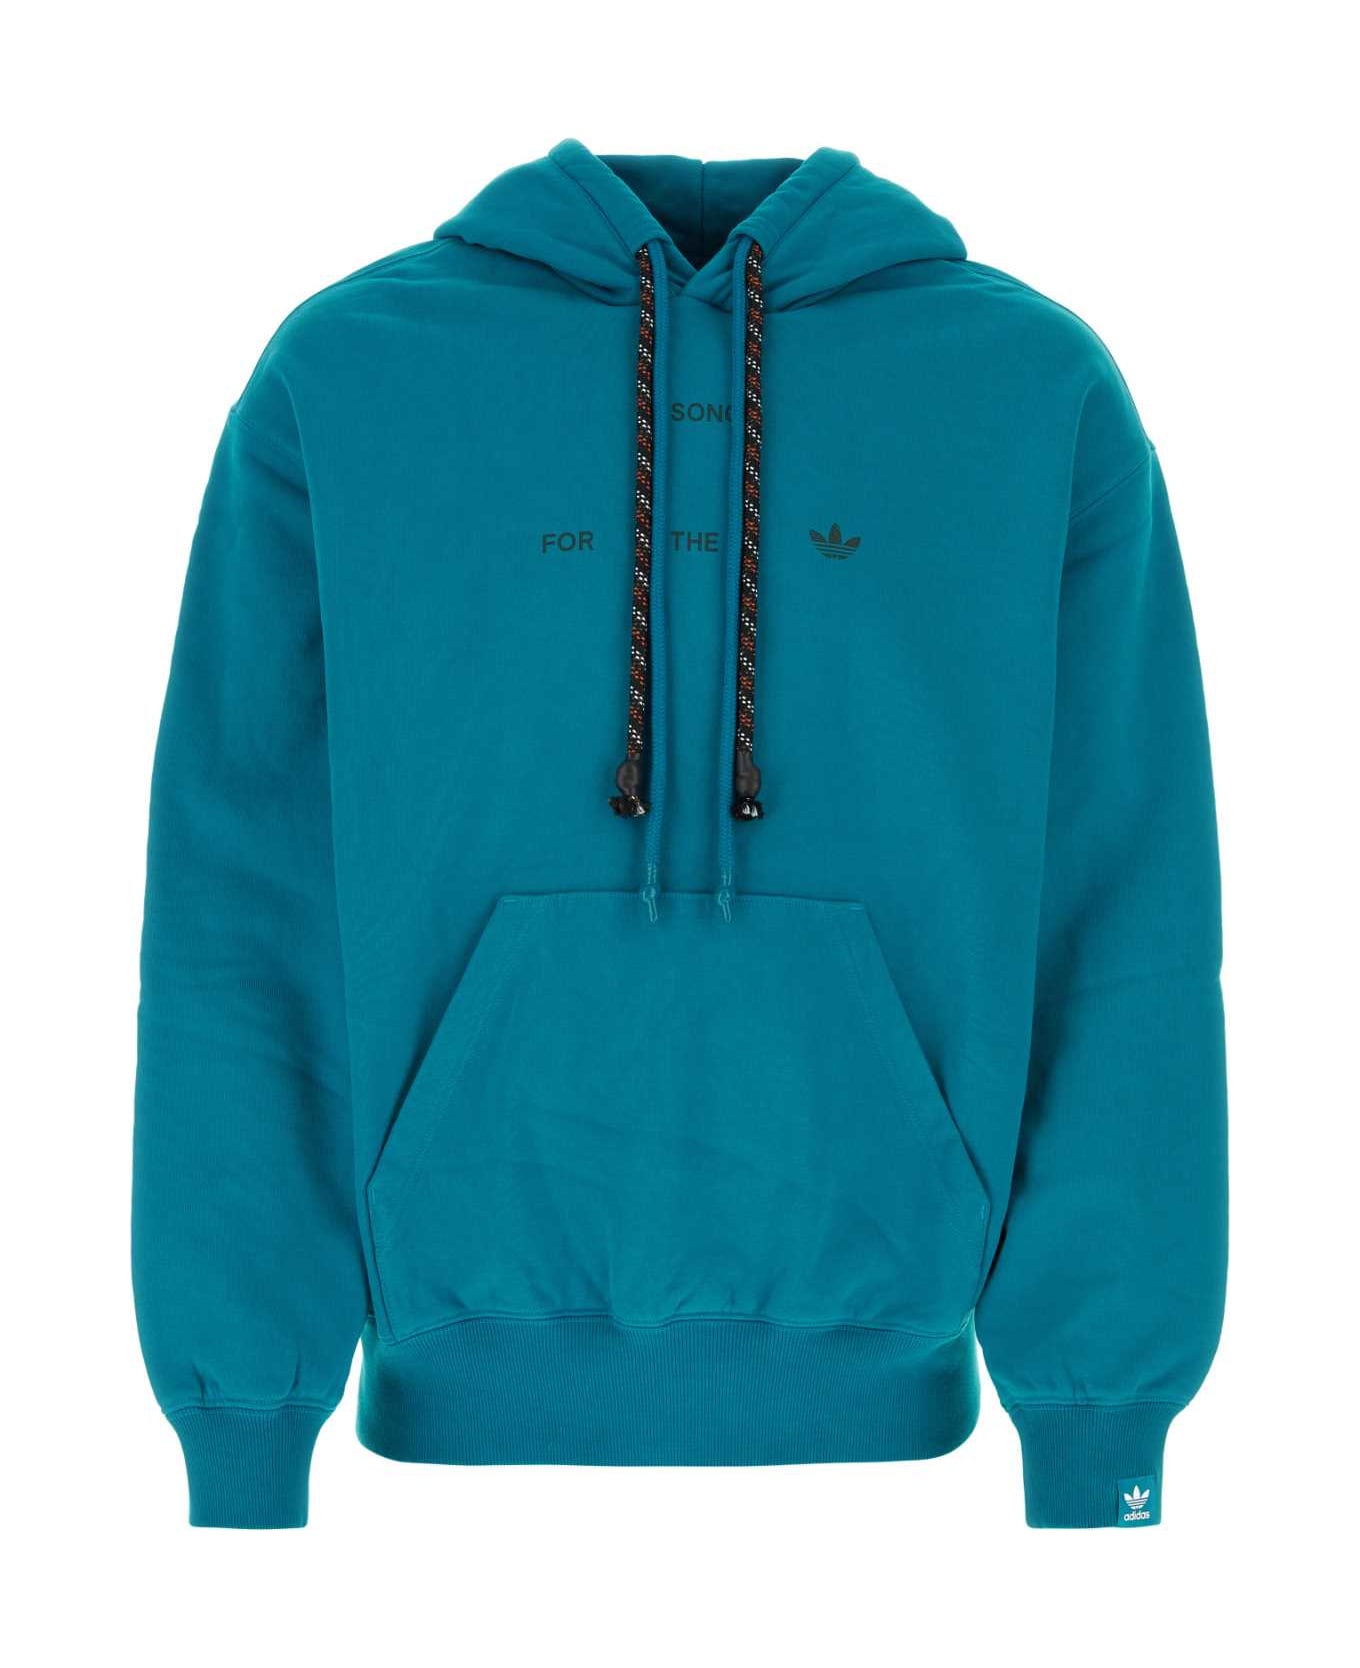 Adidas Turquoise Cotton Adidas X Song For The Mute Sweatshirt - ACTIVETEAL